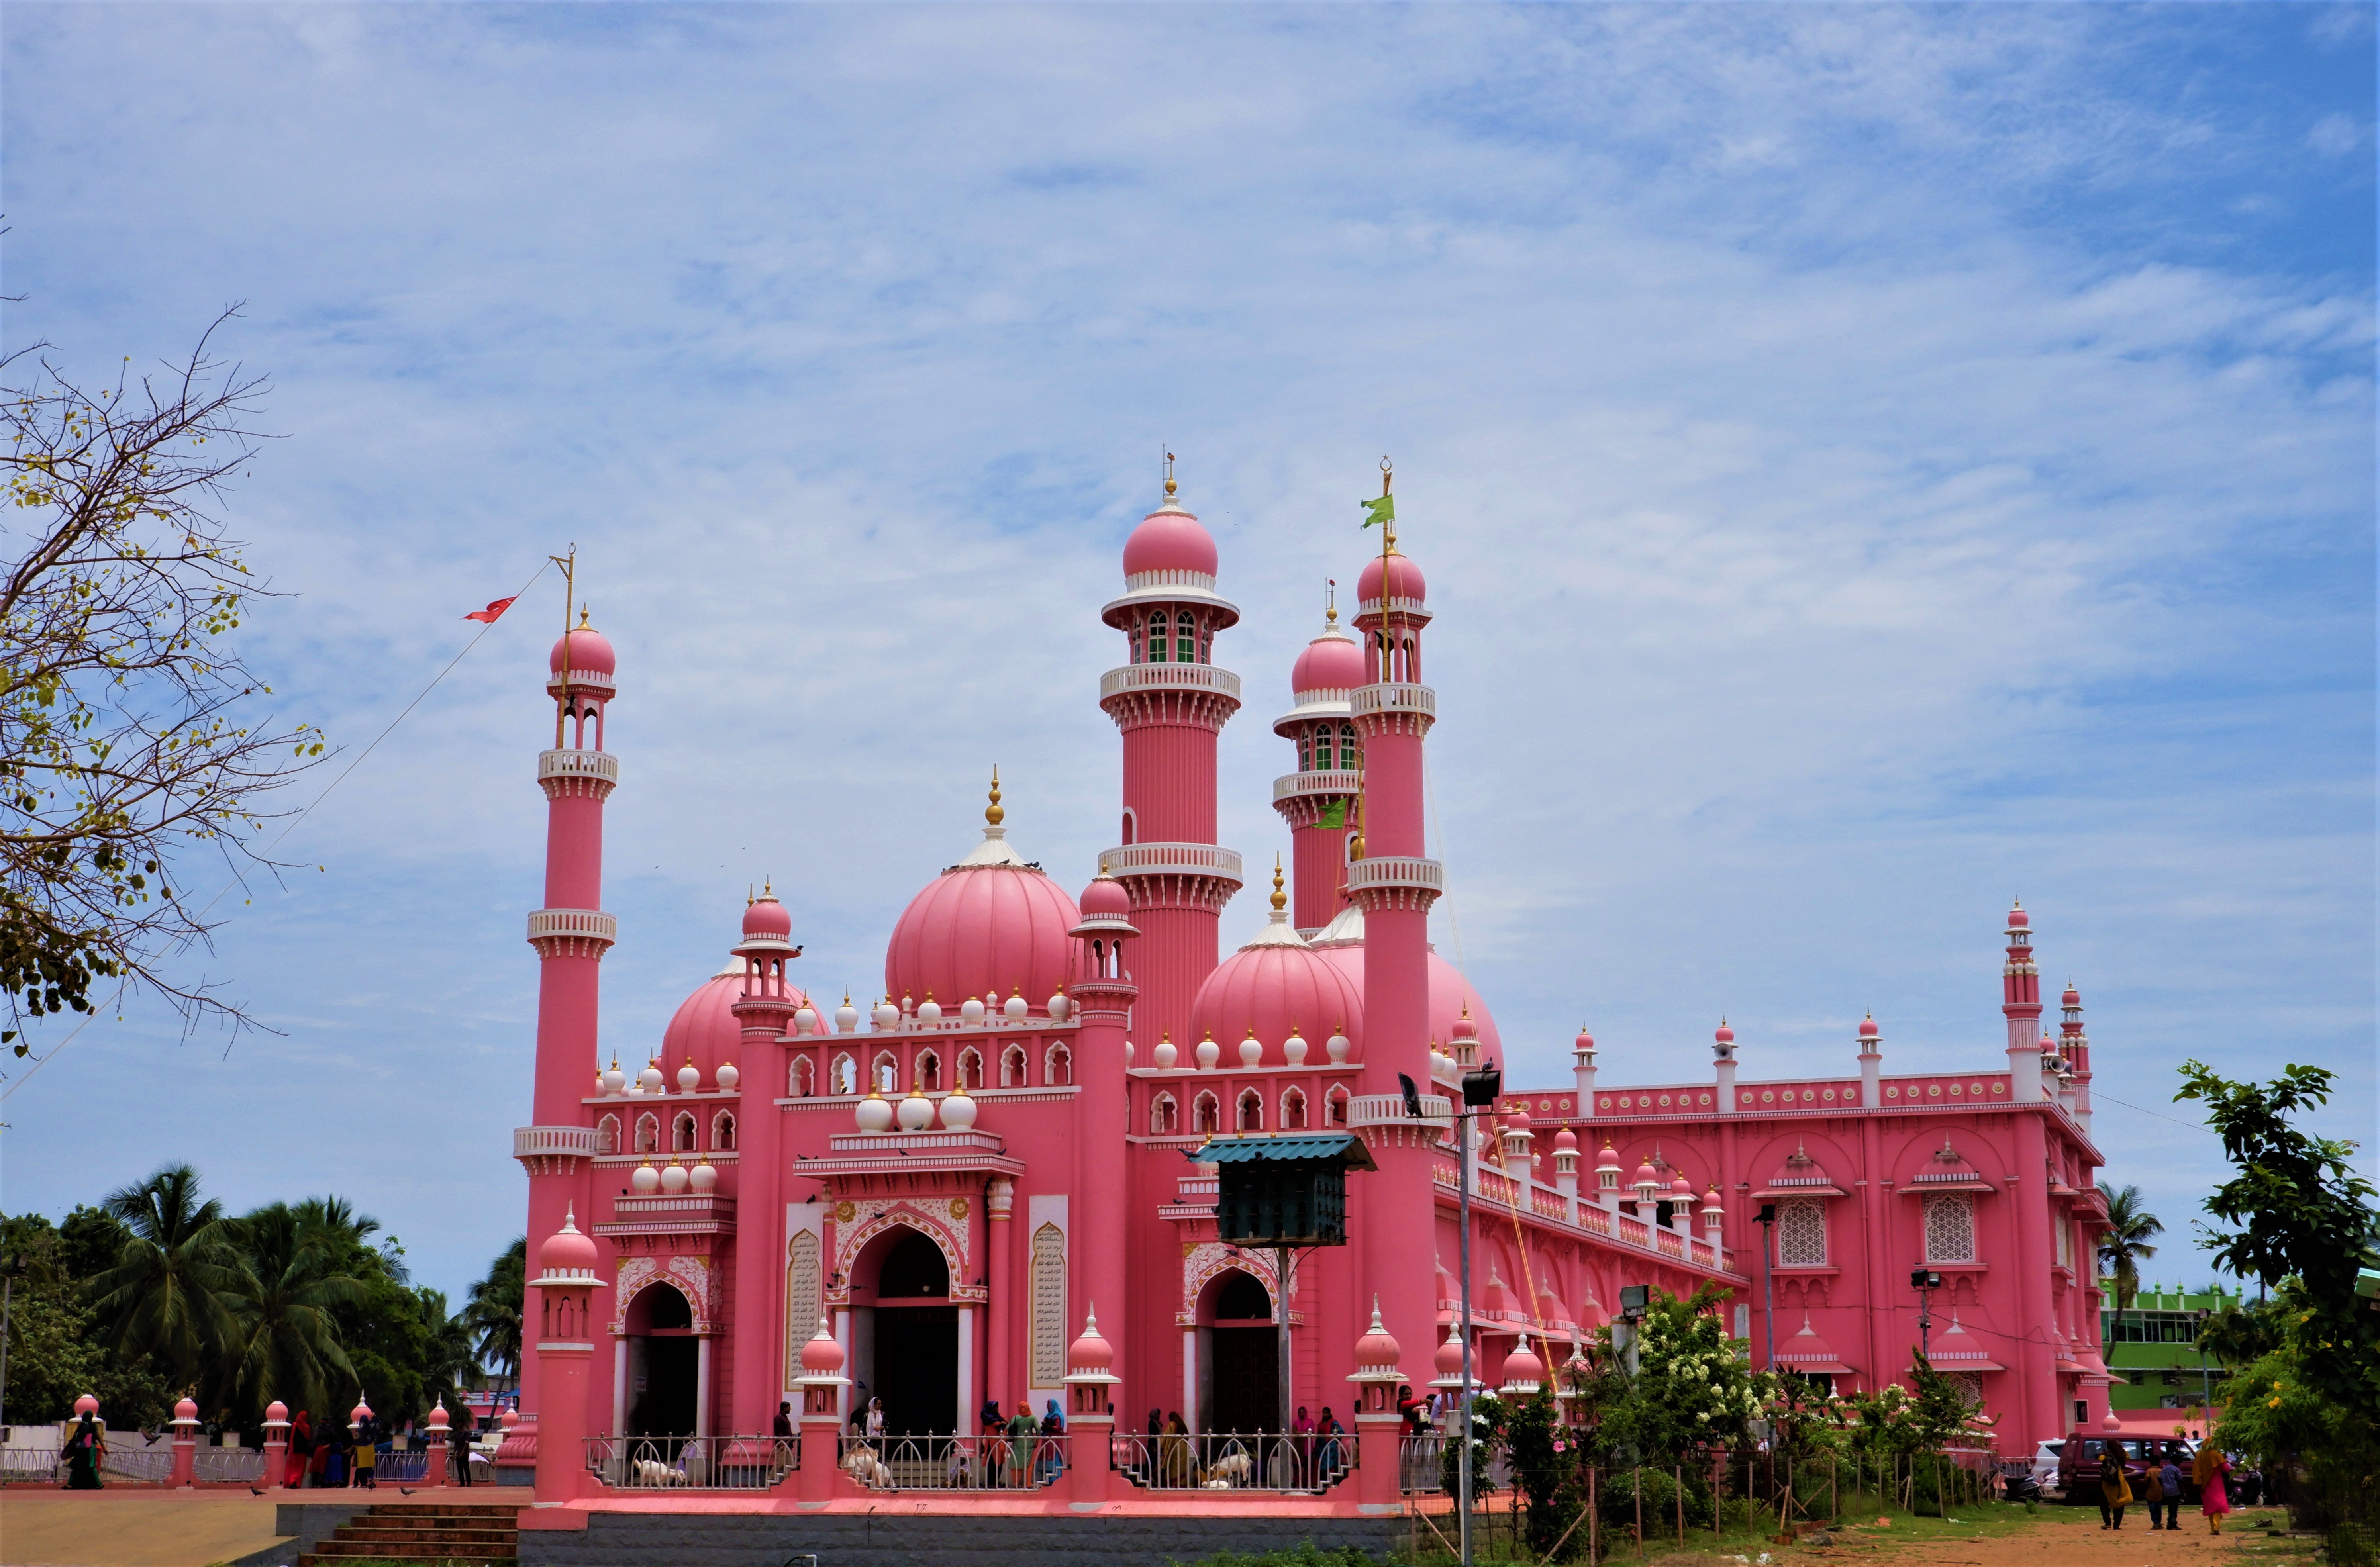 Beemapally Mosque is a religious and cultural significance